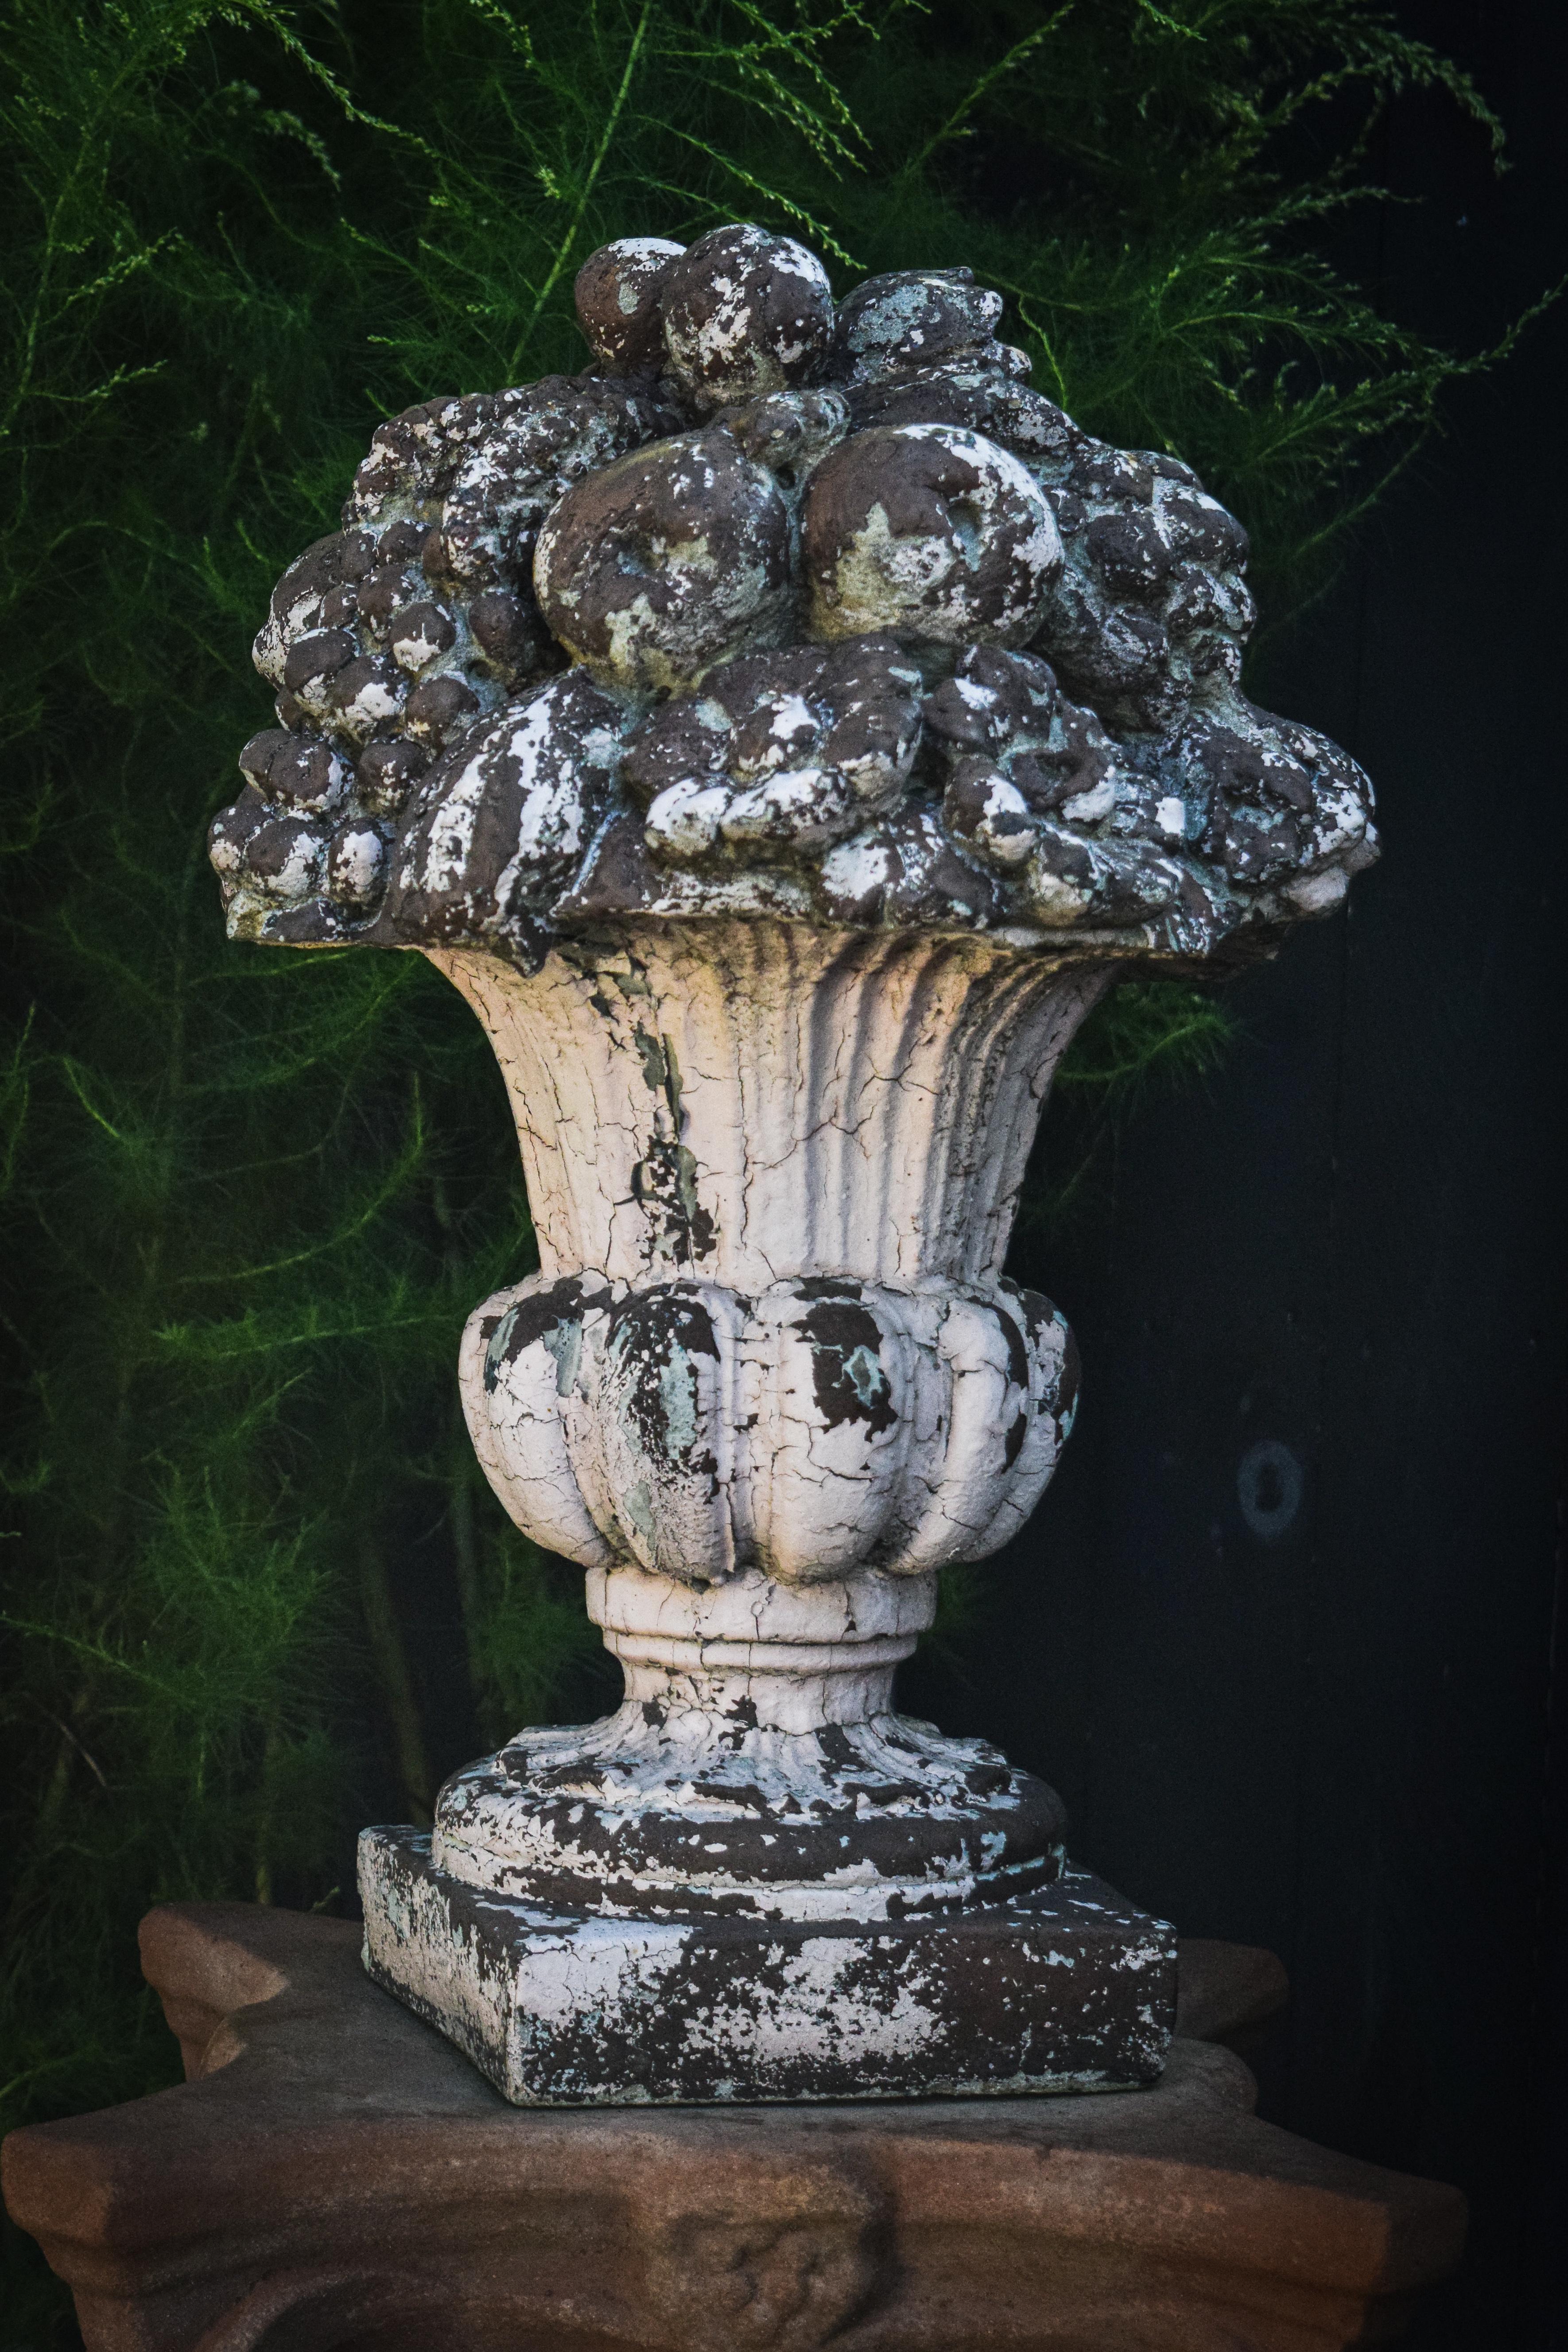 Brimming with fruit out of a traditional urn style base, this sculpture evokes a sense of long-standing abundancy. Looking pretty in vintage powder pink, each ornament is attractively patinaed with a one of a kind craquelure, allowing the composite